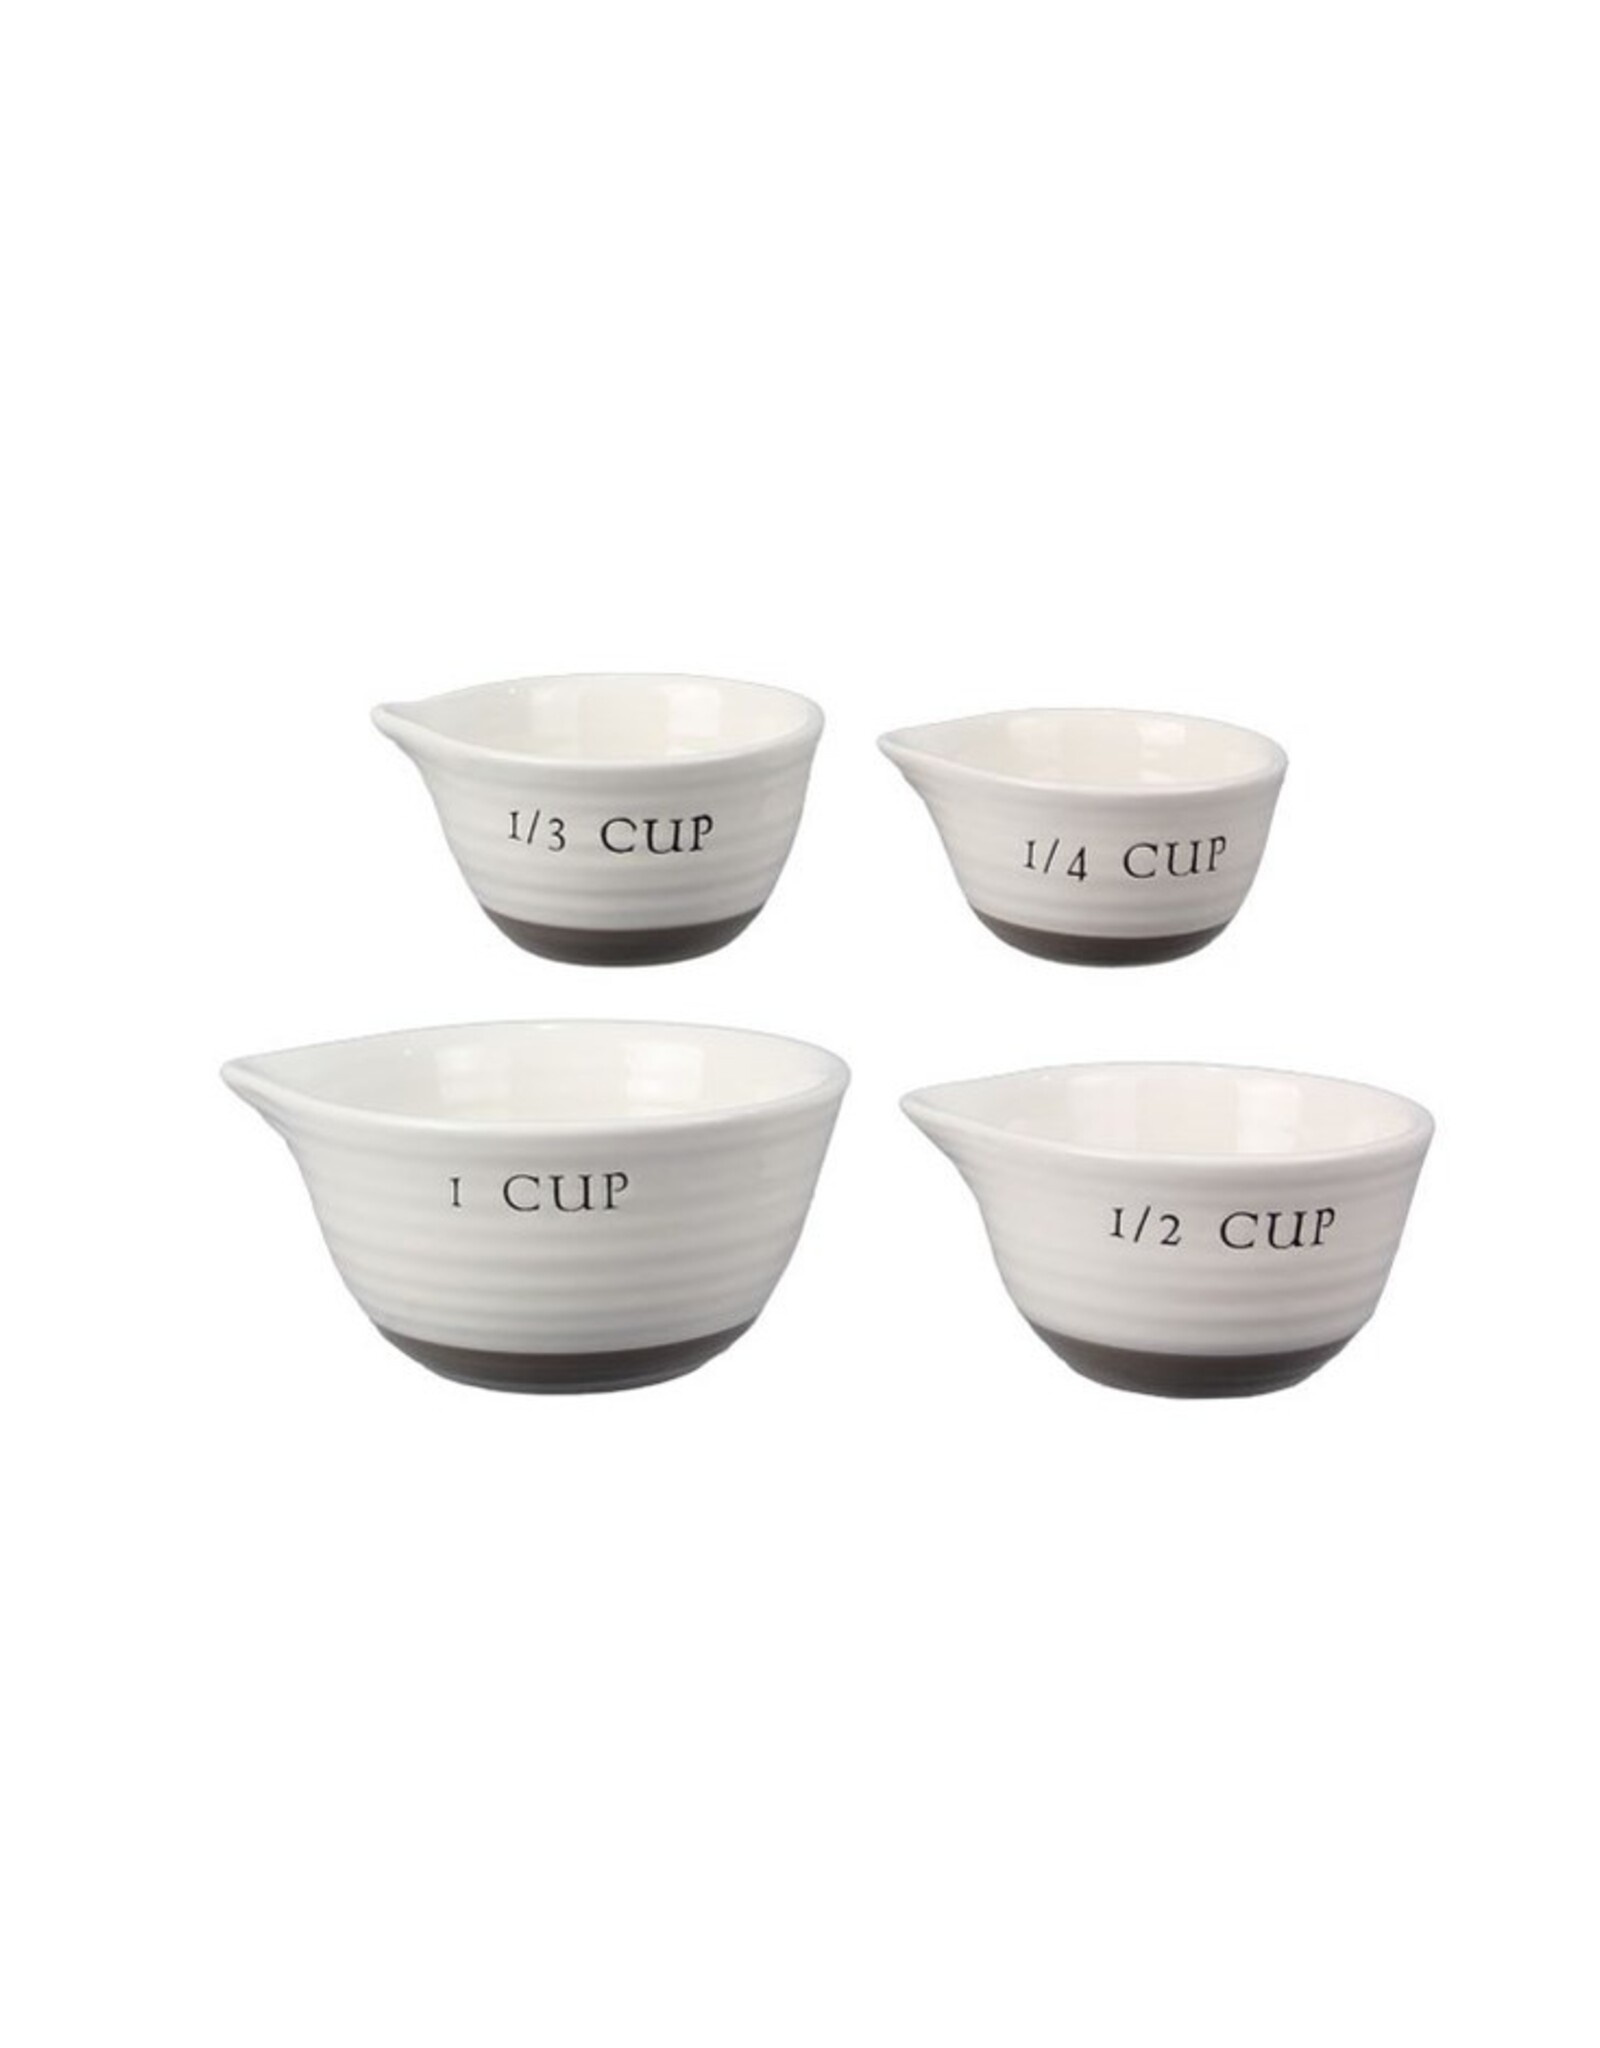 Young's Beige & White Ceramic Pottery-Measuring Cups 4pc